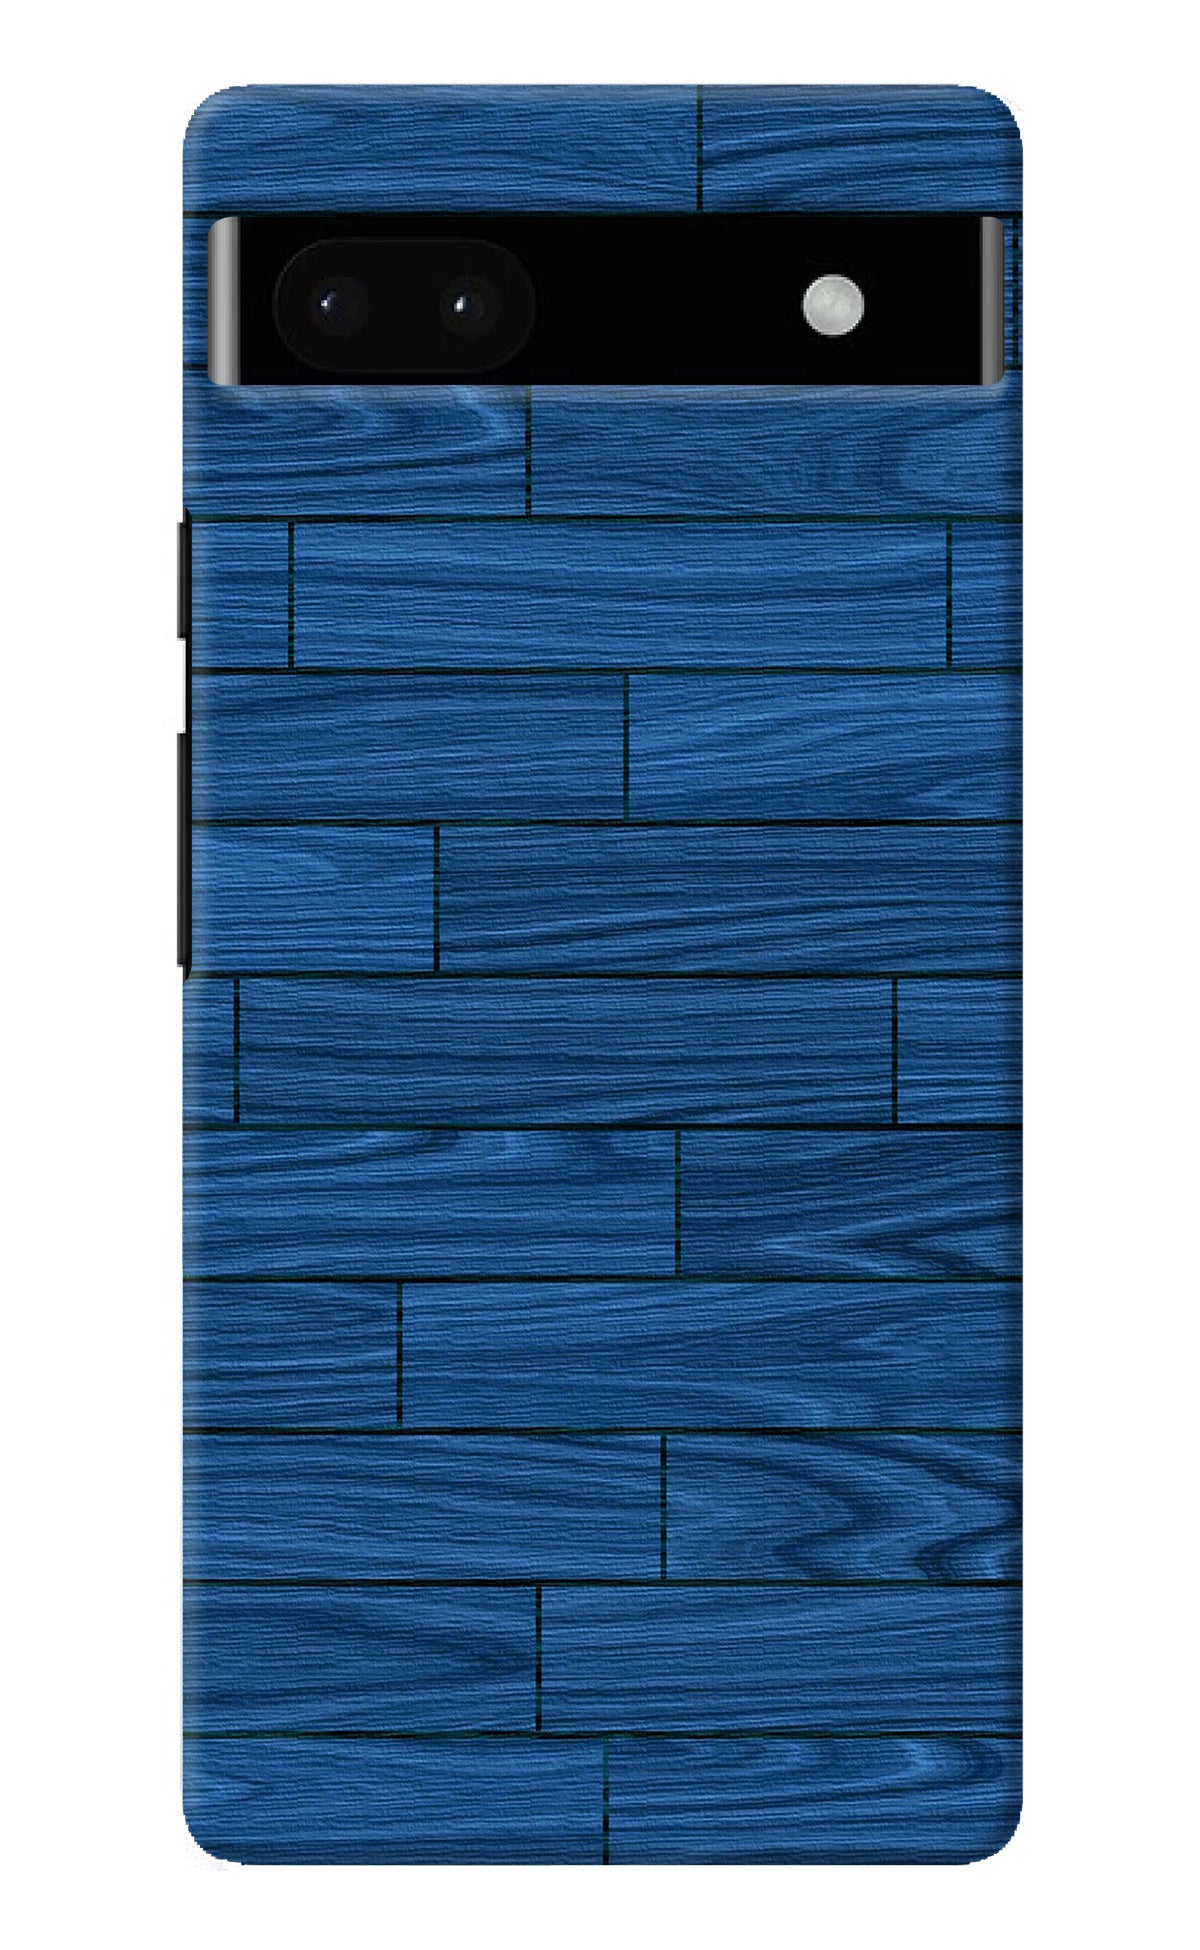 Wooden Texture Google Pixel 6A Back Cover